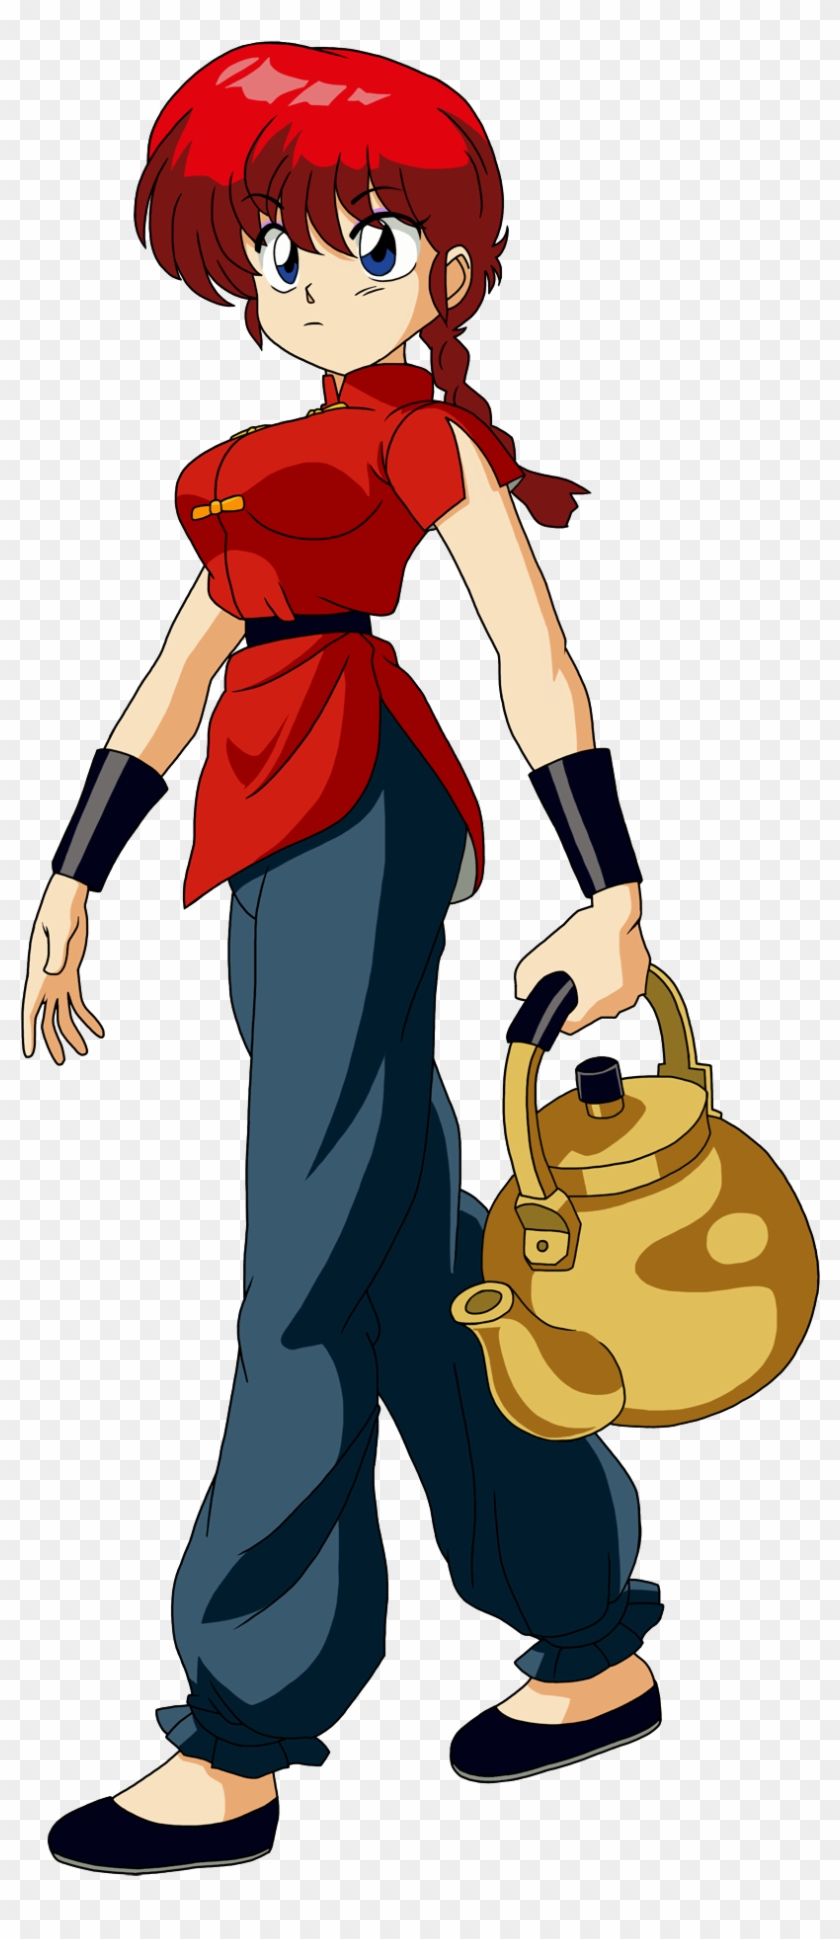 Ranma Saotome Ranma Saotome Free Transparent Png Clipart Images Download Add interesting content and earn coins. ranma saotome ranma saotome free